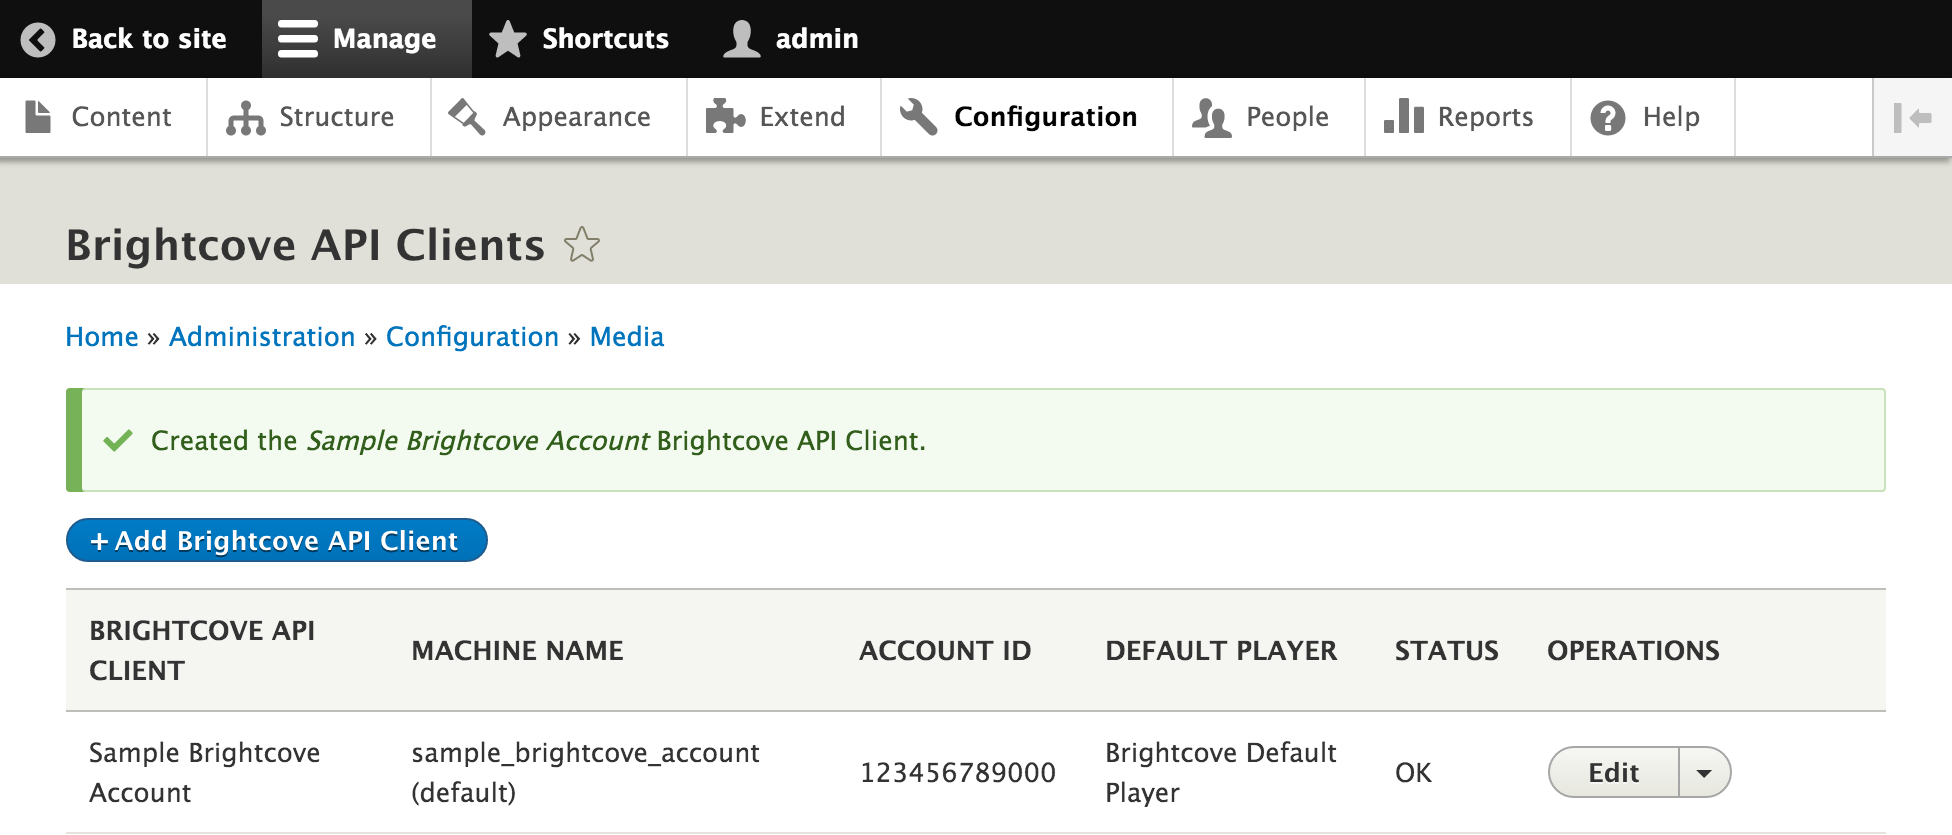 Brightcove API Clients successfully added new client